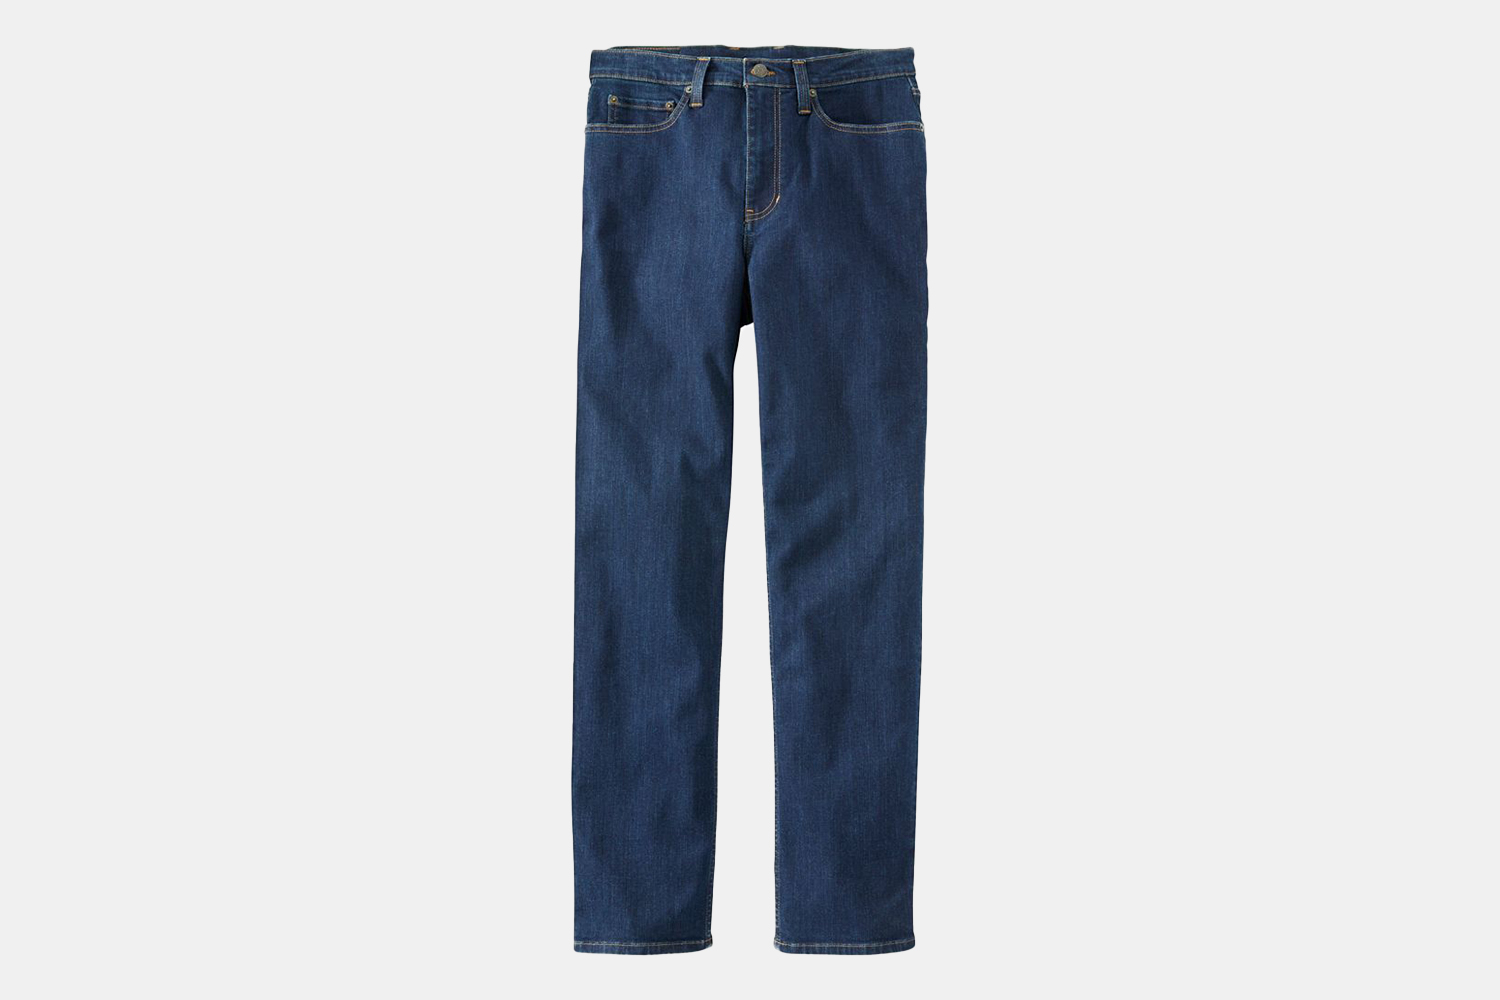 a pair of medium wash classic fit jeans